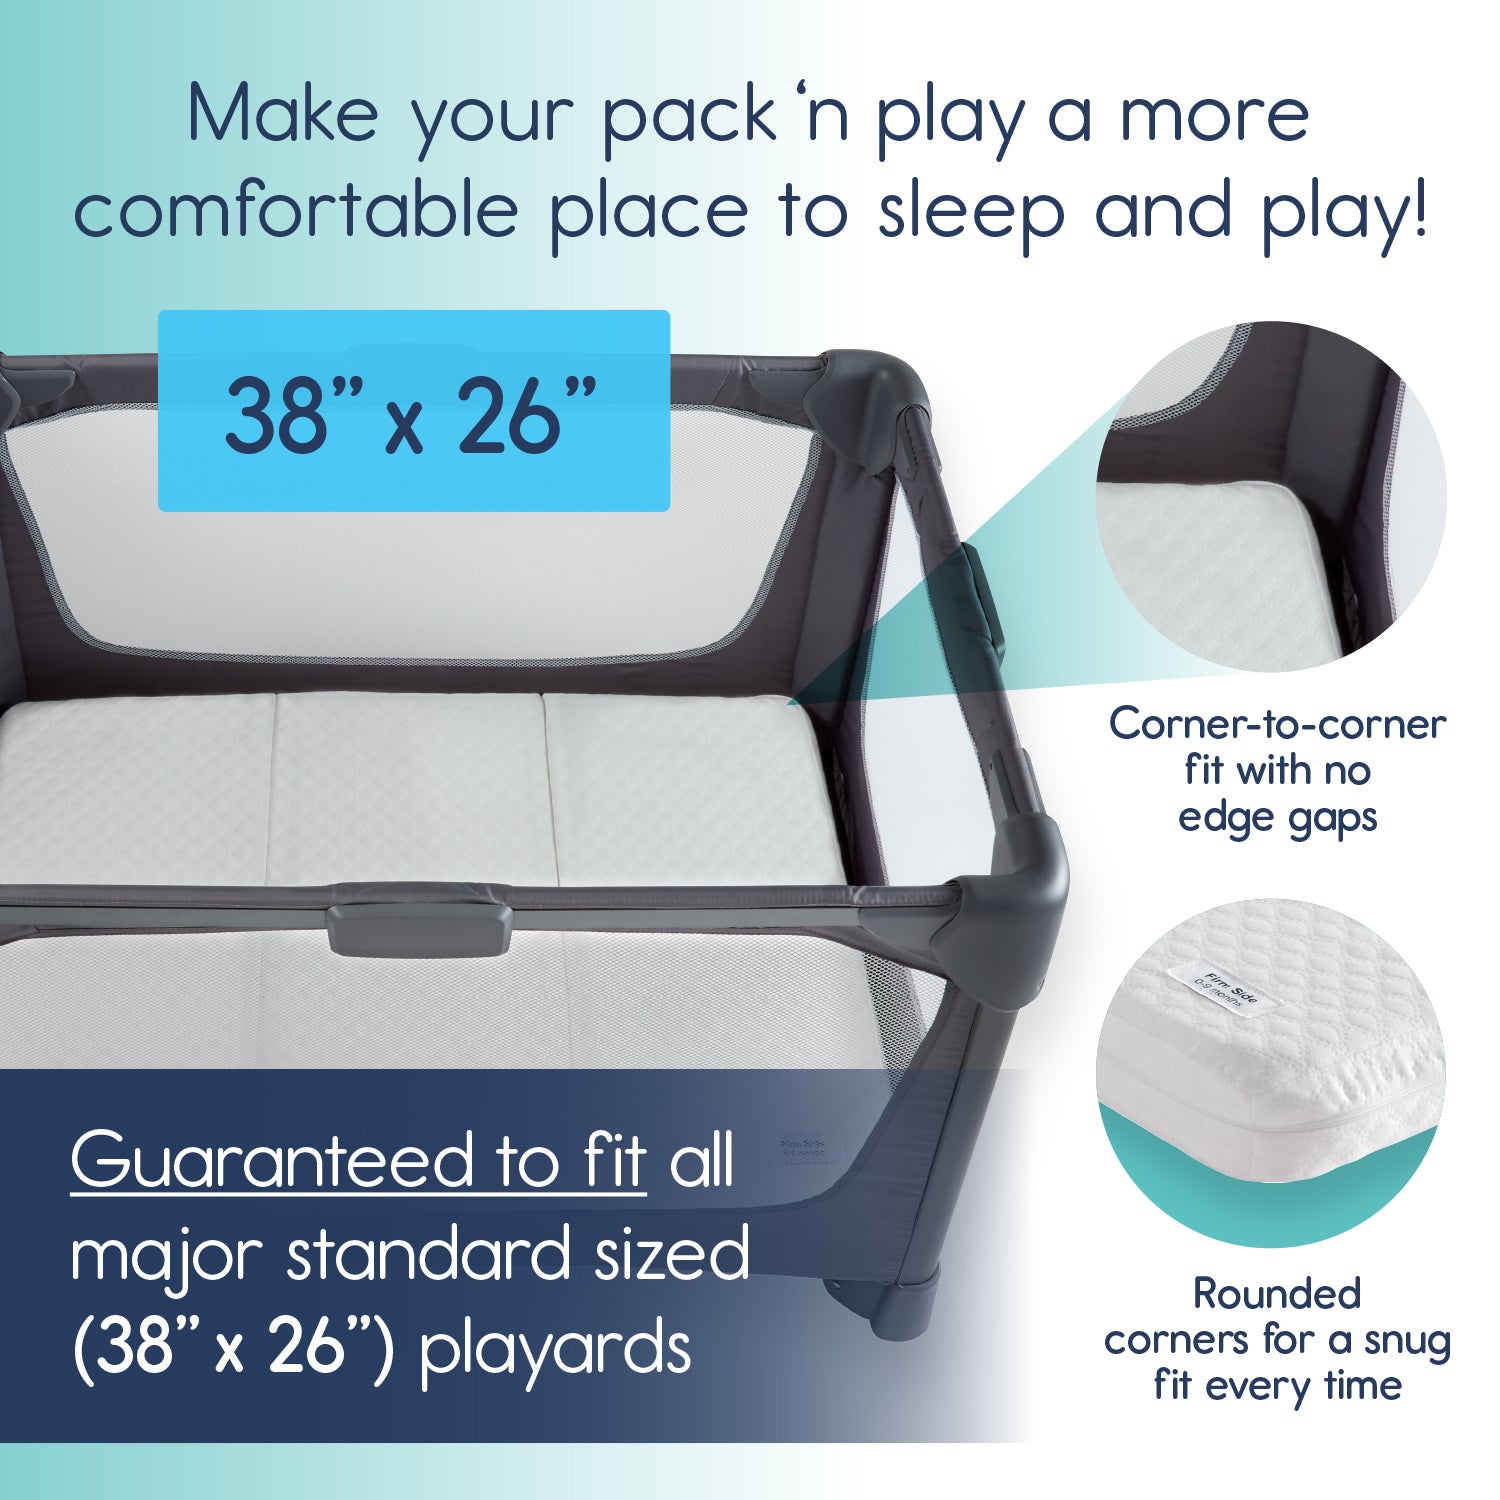 travel mattress for pack n play